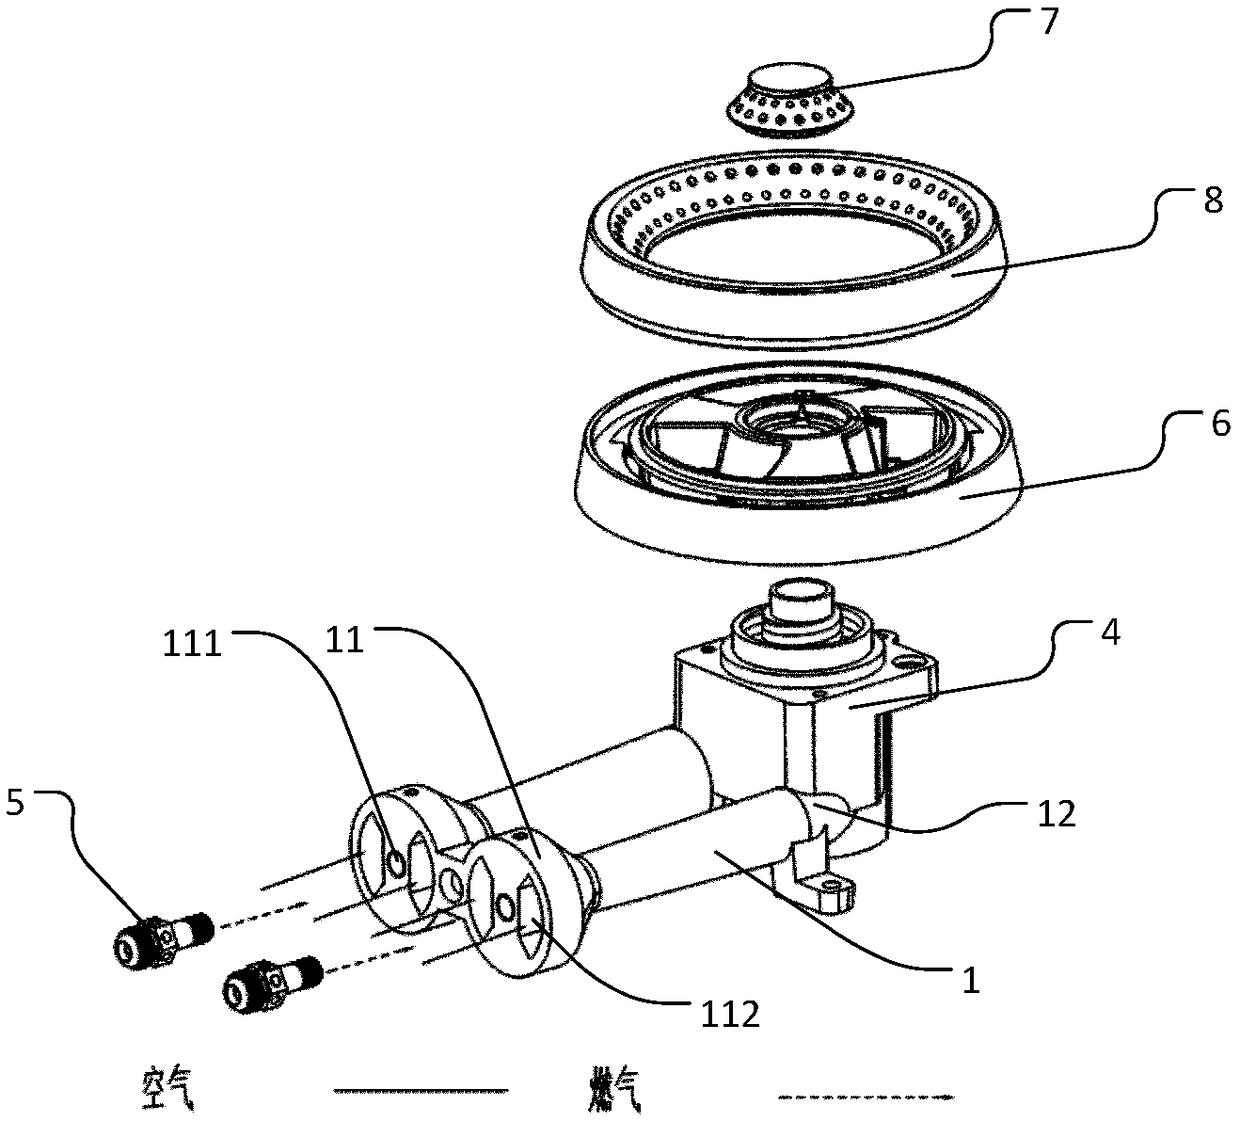 Burner and fuel gas burning device